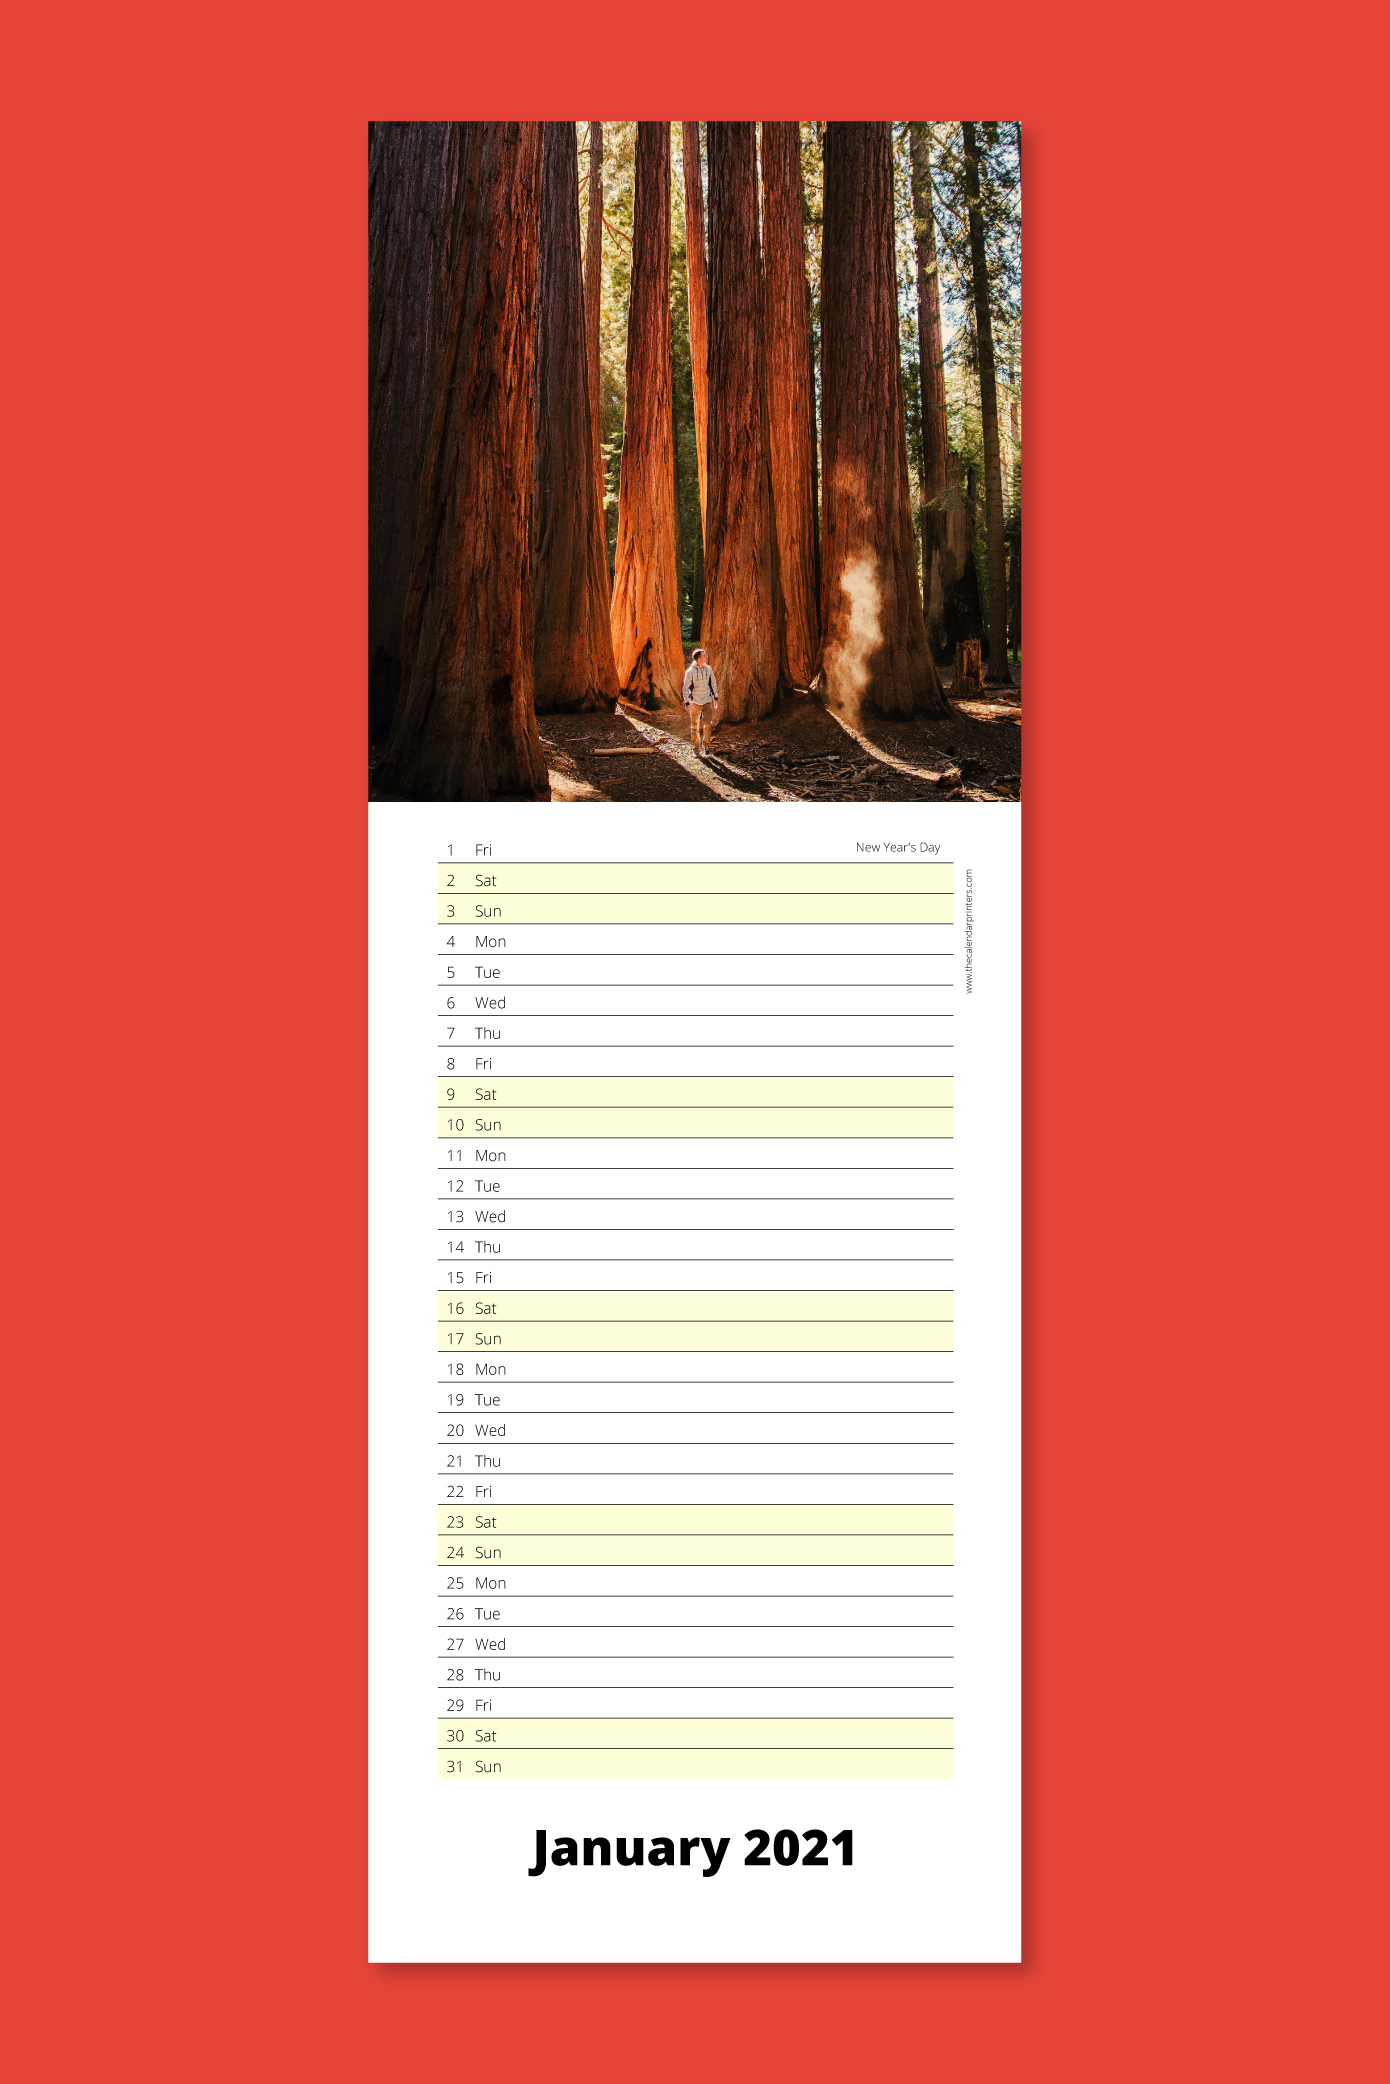 Slimline calendars for your wall